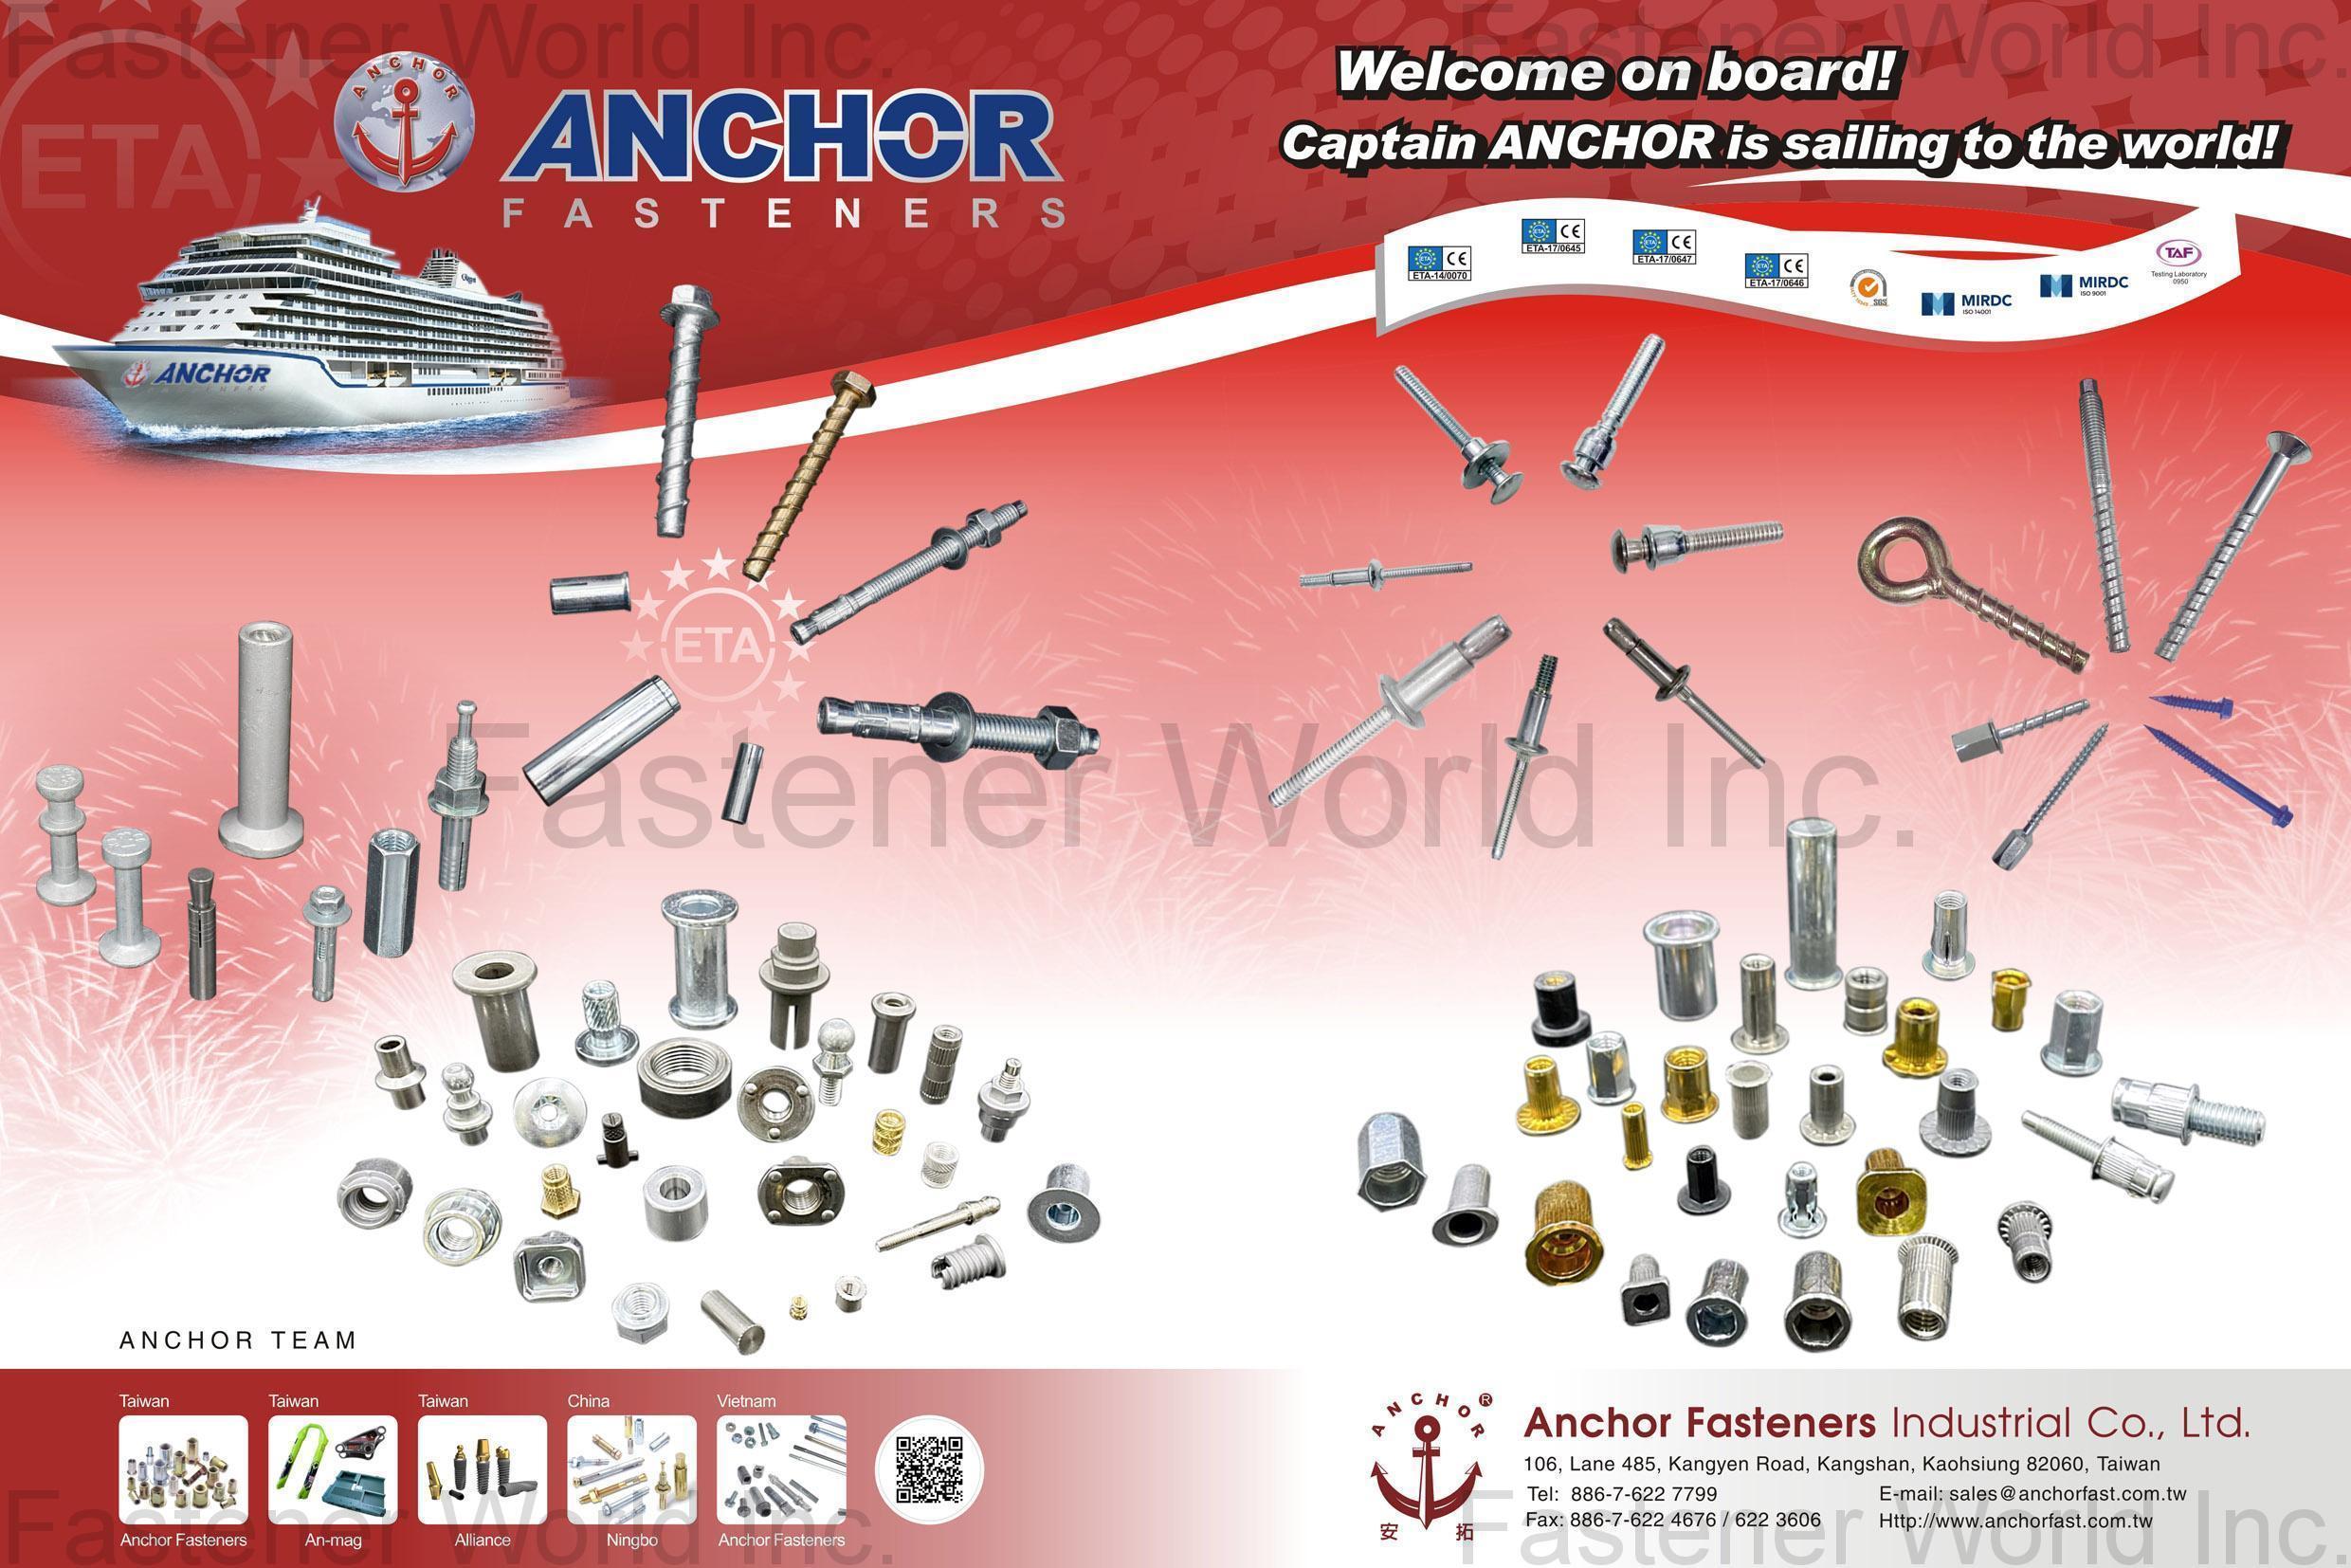 ANCHOR FASTENERS INDUSTRIAL CO., LTD.  , Drop-in Anchors, Expansion Anchors, Wire Anchors, Blind Nuts / Rivet Nuts, Sleeve Anchors, Anchor Bolts, Automotive Parts, Fixing, Anchor Nuts, Power Blind Rivets, Clinching Fasteners, Anchor Thread, Anchor Stud, Jack Nuts, Split Nuts, Rubber Nuts, Wheel Hub Bolts, Ball Studs & Cases